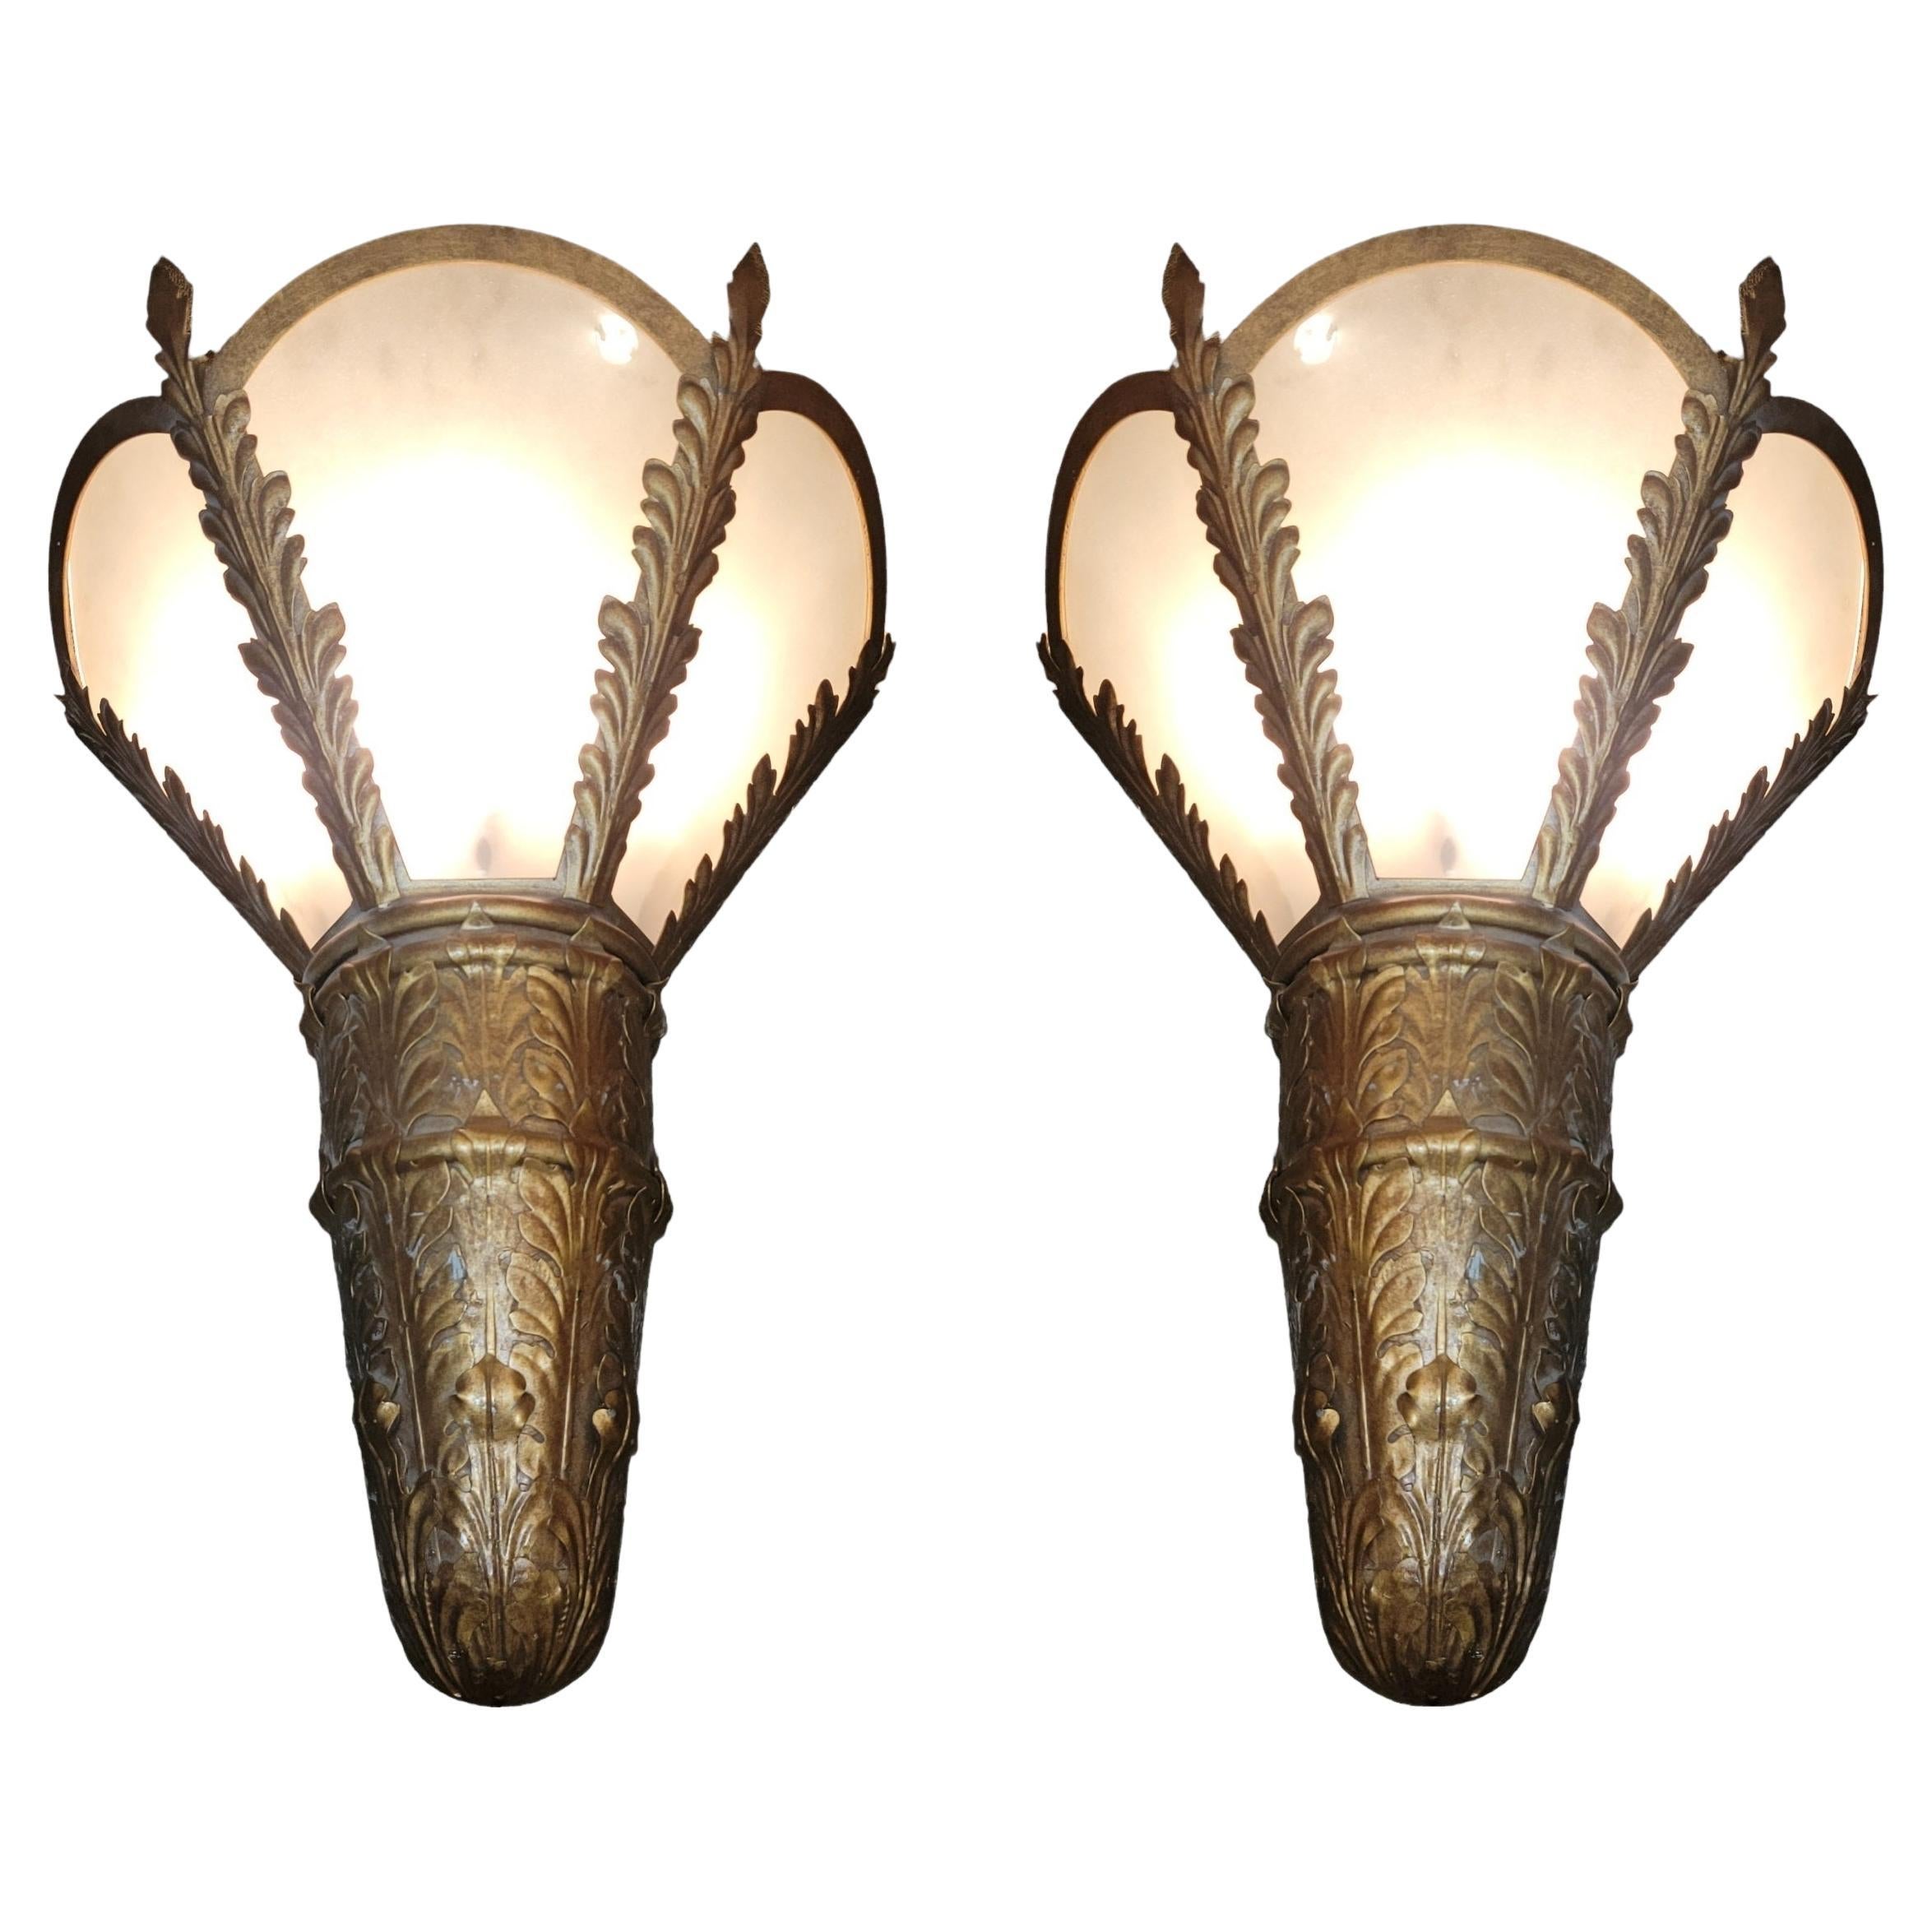 Pair of Metal Sconces From The Century Plaza Hotel For Sale